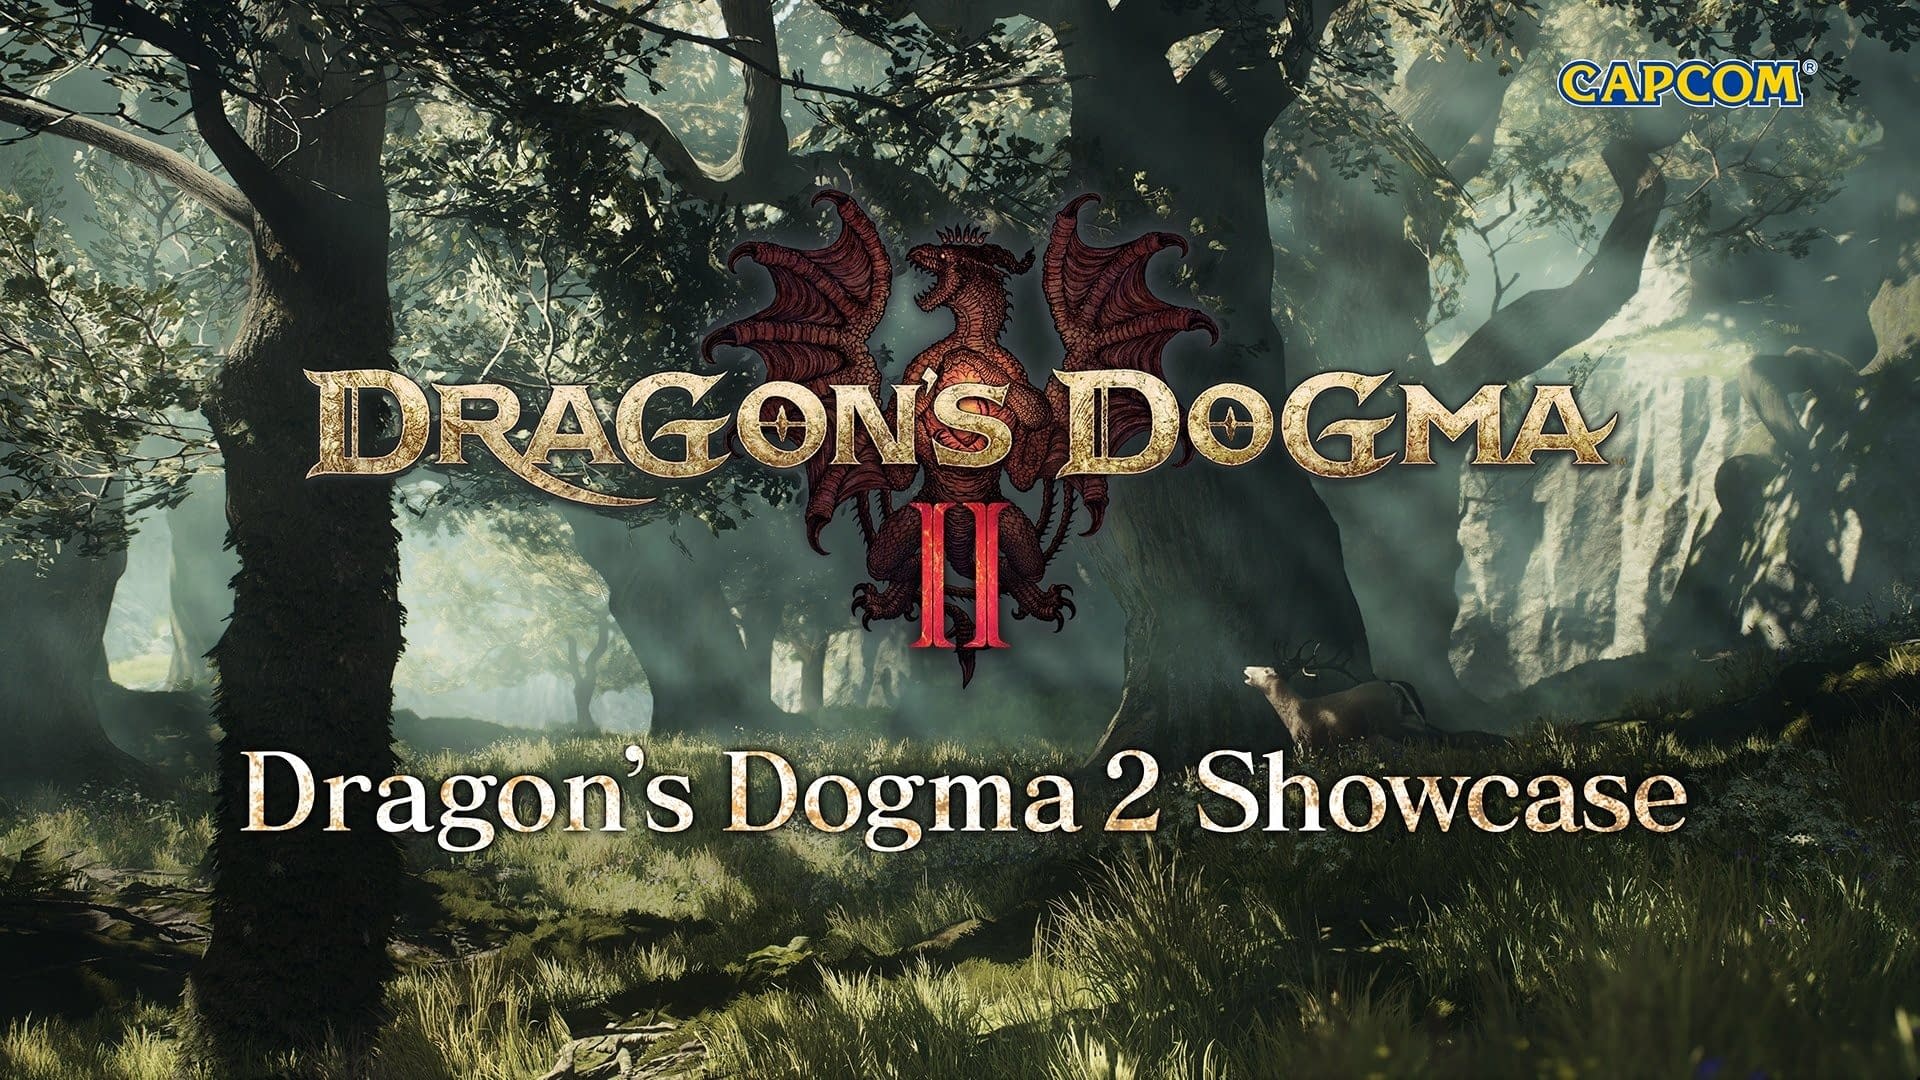 Dragon’s Dogma II Live Broadcast Event Date Announced: New Details Comes